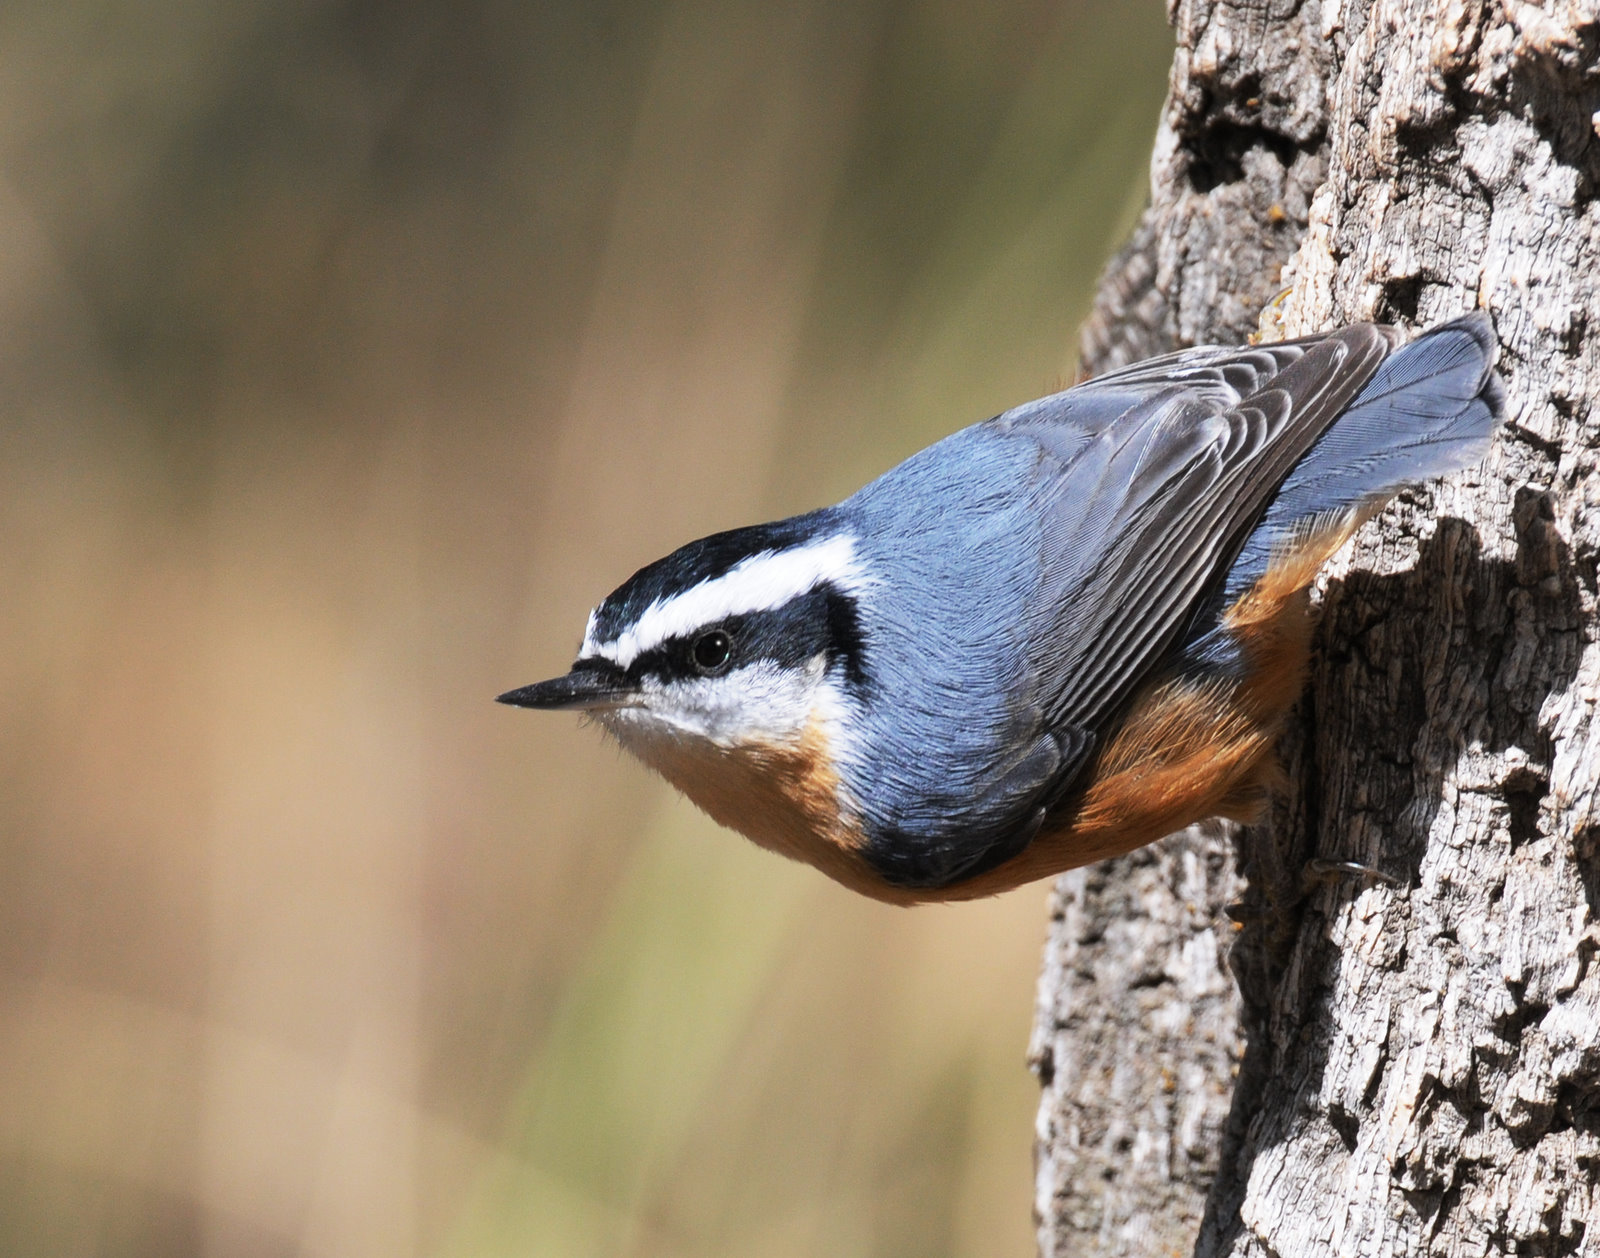 Nuthatch, Red-breasted